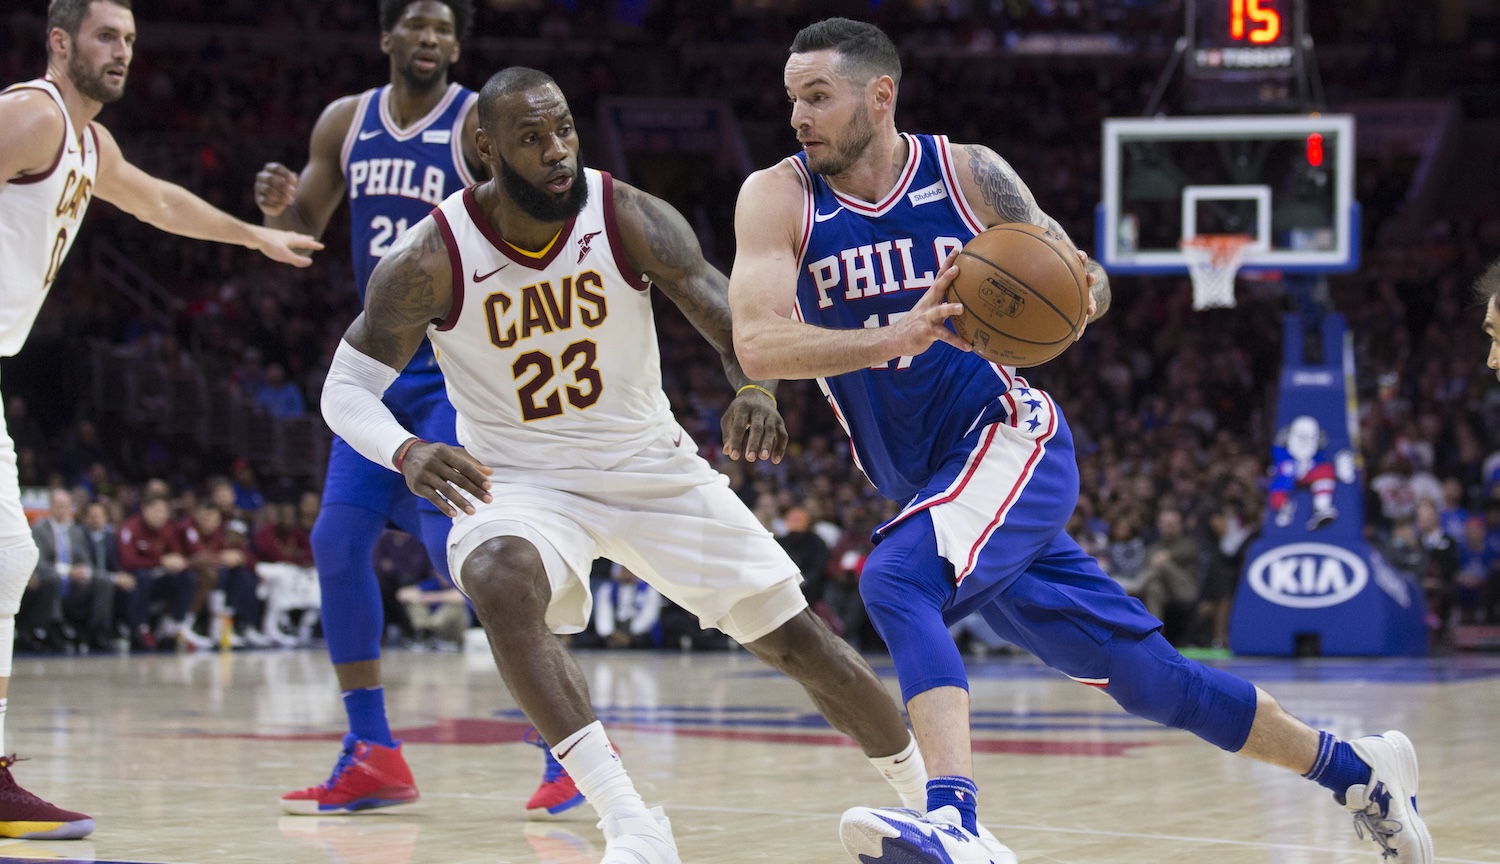 PHILADELPHIA, PA - NOVEMBER 27: JJ Redick #17 of the Philadelphia 76ers drives to the basket against LeBron James #23 of the Cleveland Cavaliers at the Wells Fargo Center on November 27, 2017 in Philadelphia, Pennsylvania. NOTE TO USER: User expressly acknowledges and agrees that, by downloading and or using this photograph, User is consenting to the terms and conditions of the Getty Images License Agreement. (Photo by Mitchell Leff/Getty Images)